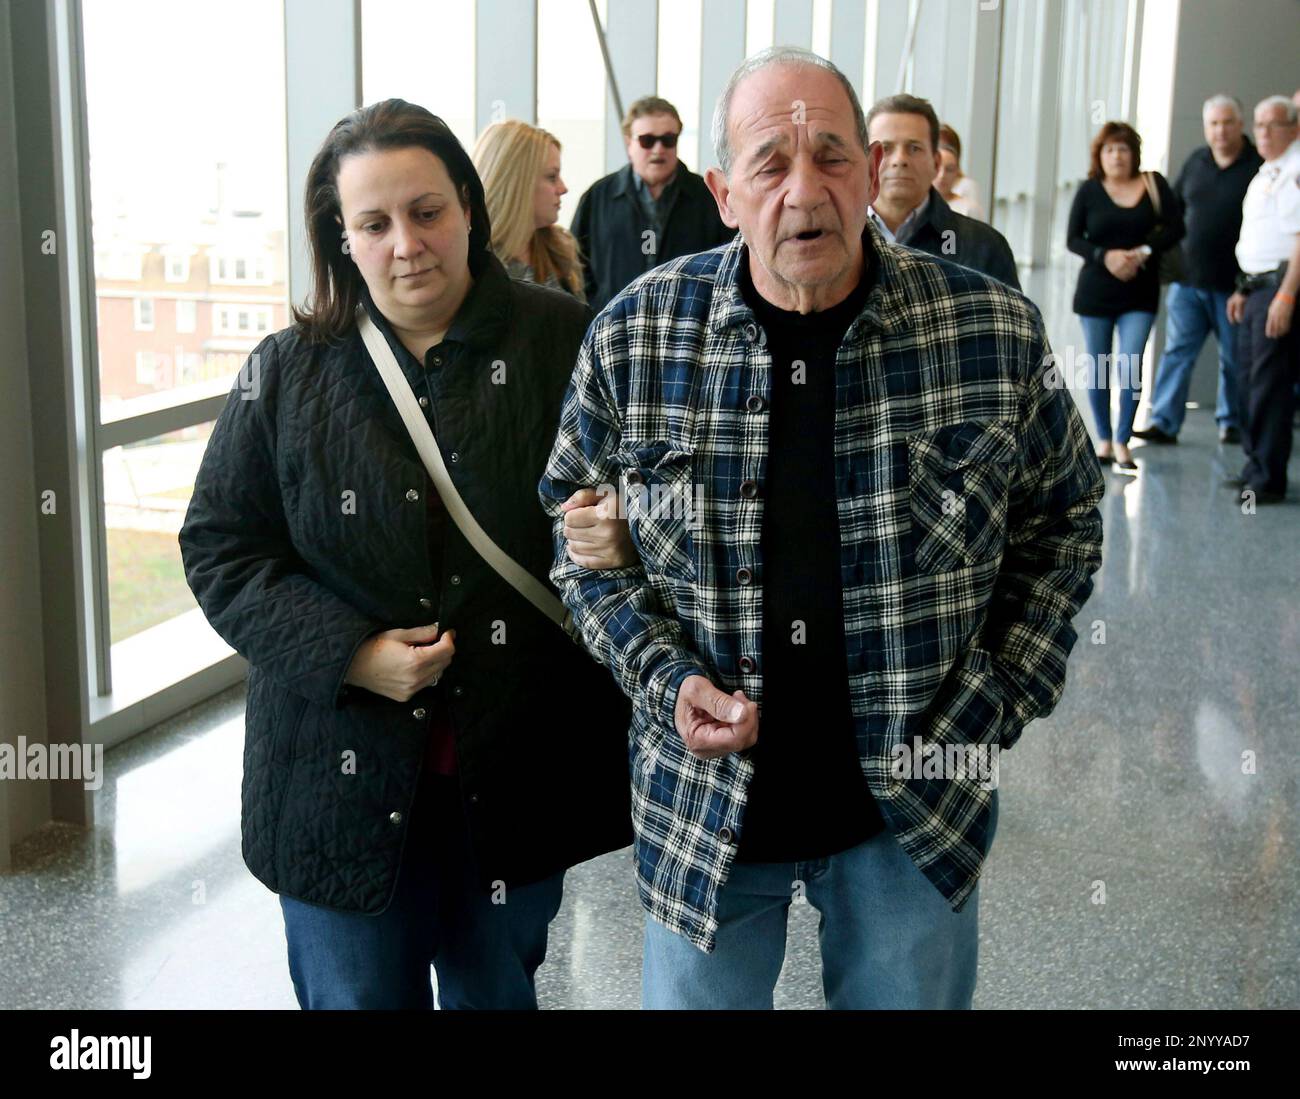 In this Thursday, May 4, 2017 photo, Roseann Rodriguez and Angelo Rodriguiez, the sister and father of the deceased Joseph Rodriguez, walk inside the Richmond Supreme Courthouse, in Staten Island, N.Y. Former New Jersey police officer Pedro Abad was convicted Thursday in a wrong-way crash that killed a fellow officer and Rodriguez in what prosecutors said was the result of extreme intoxication. (Ed Murray/NJ Advance Media via AP) Foto de stock